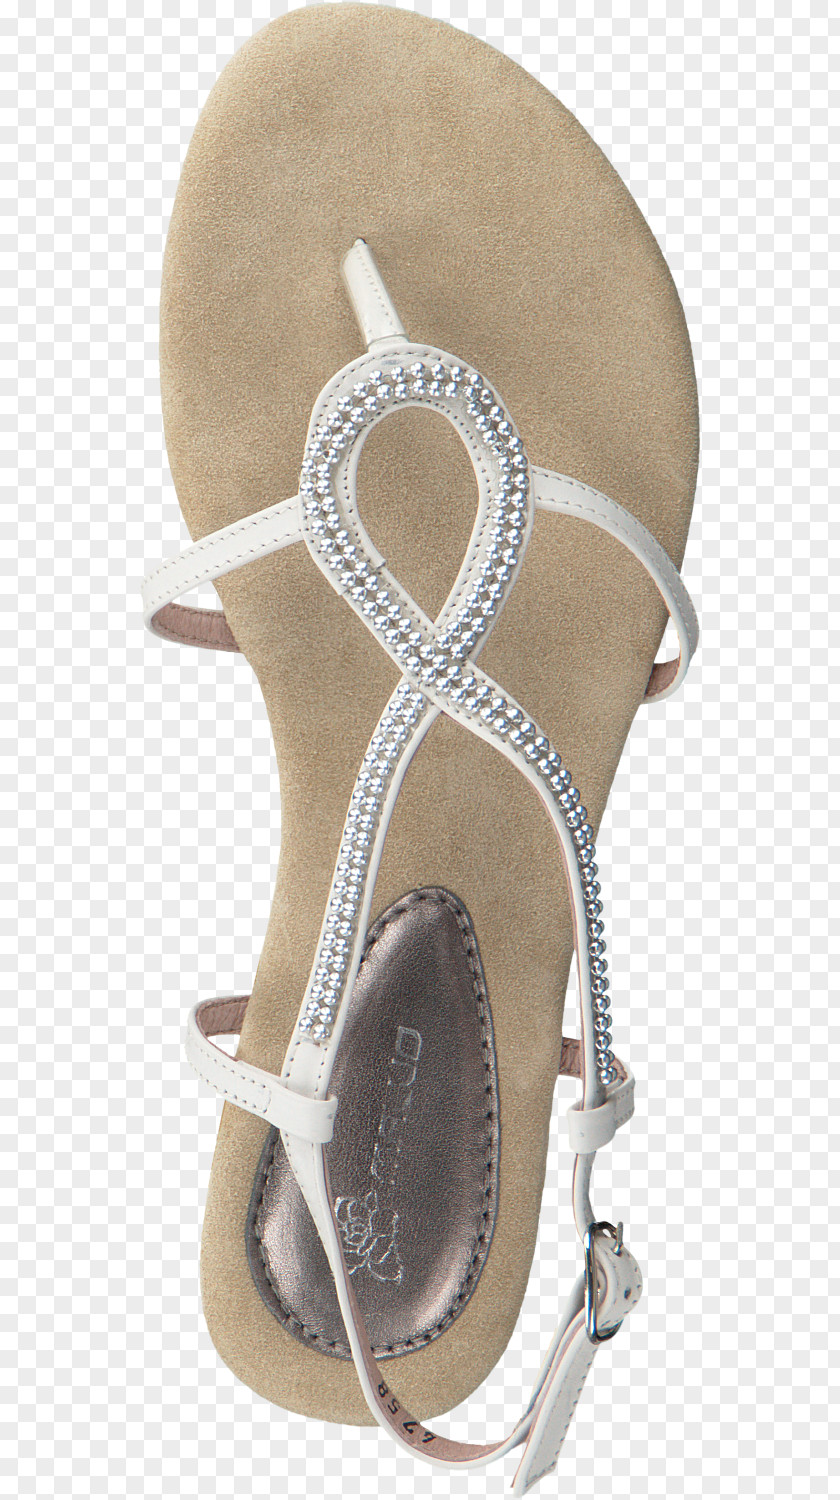 White Flat Shoes For Women Sandal Flip-flops Shoe Leather PNG